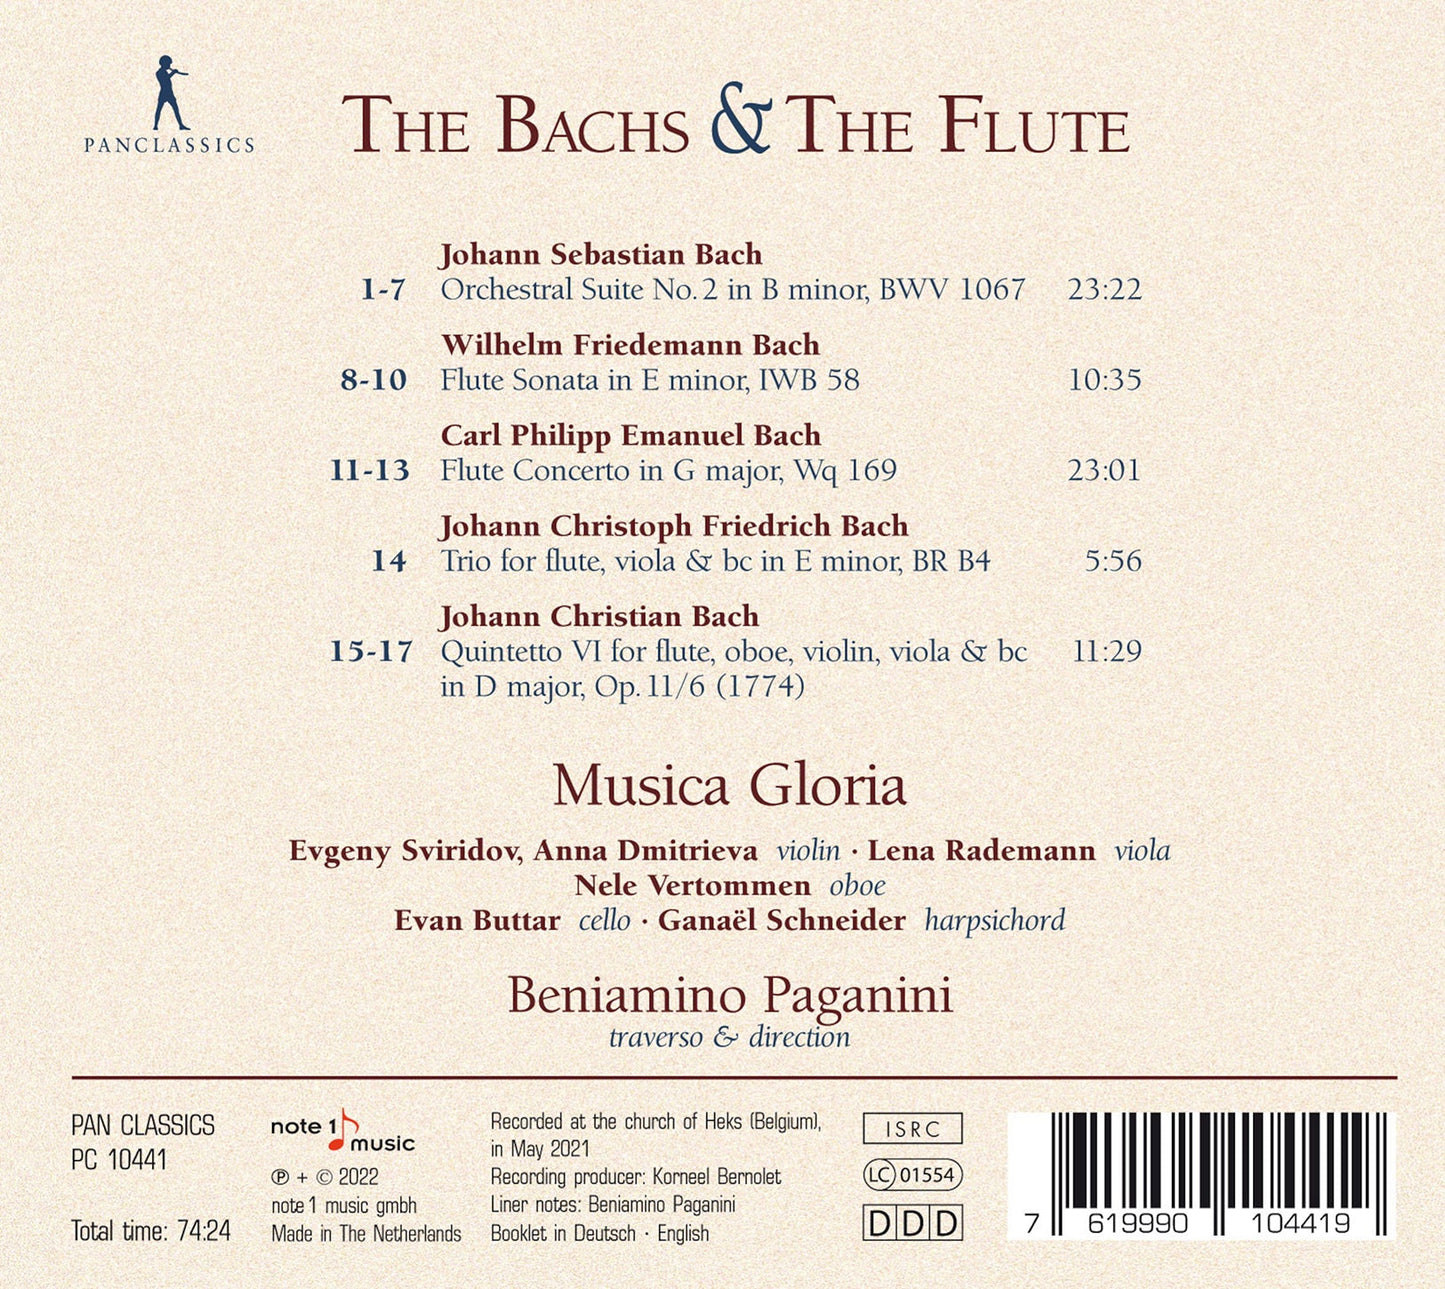 The Bachs & The Flute